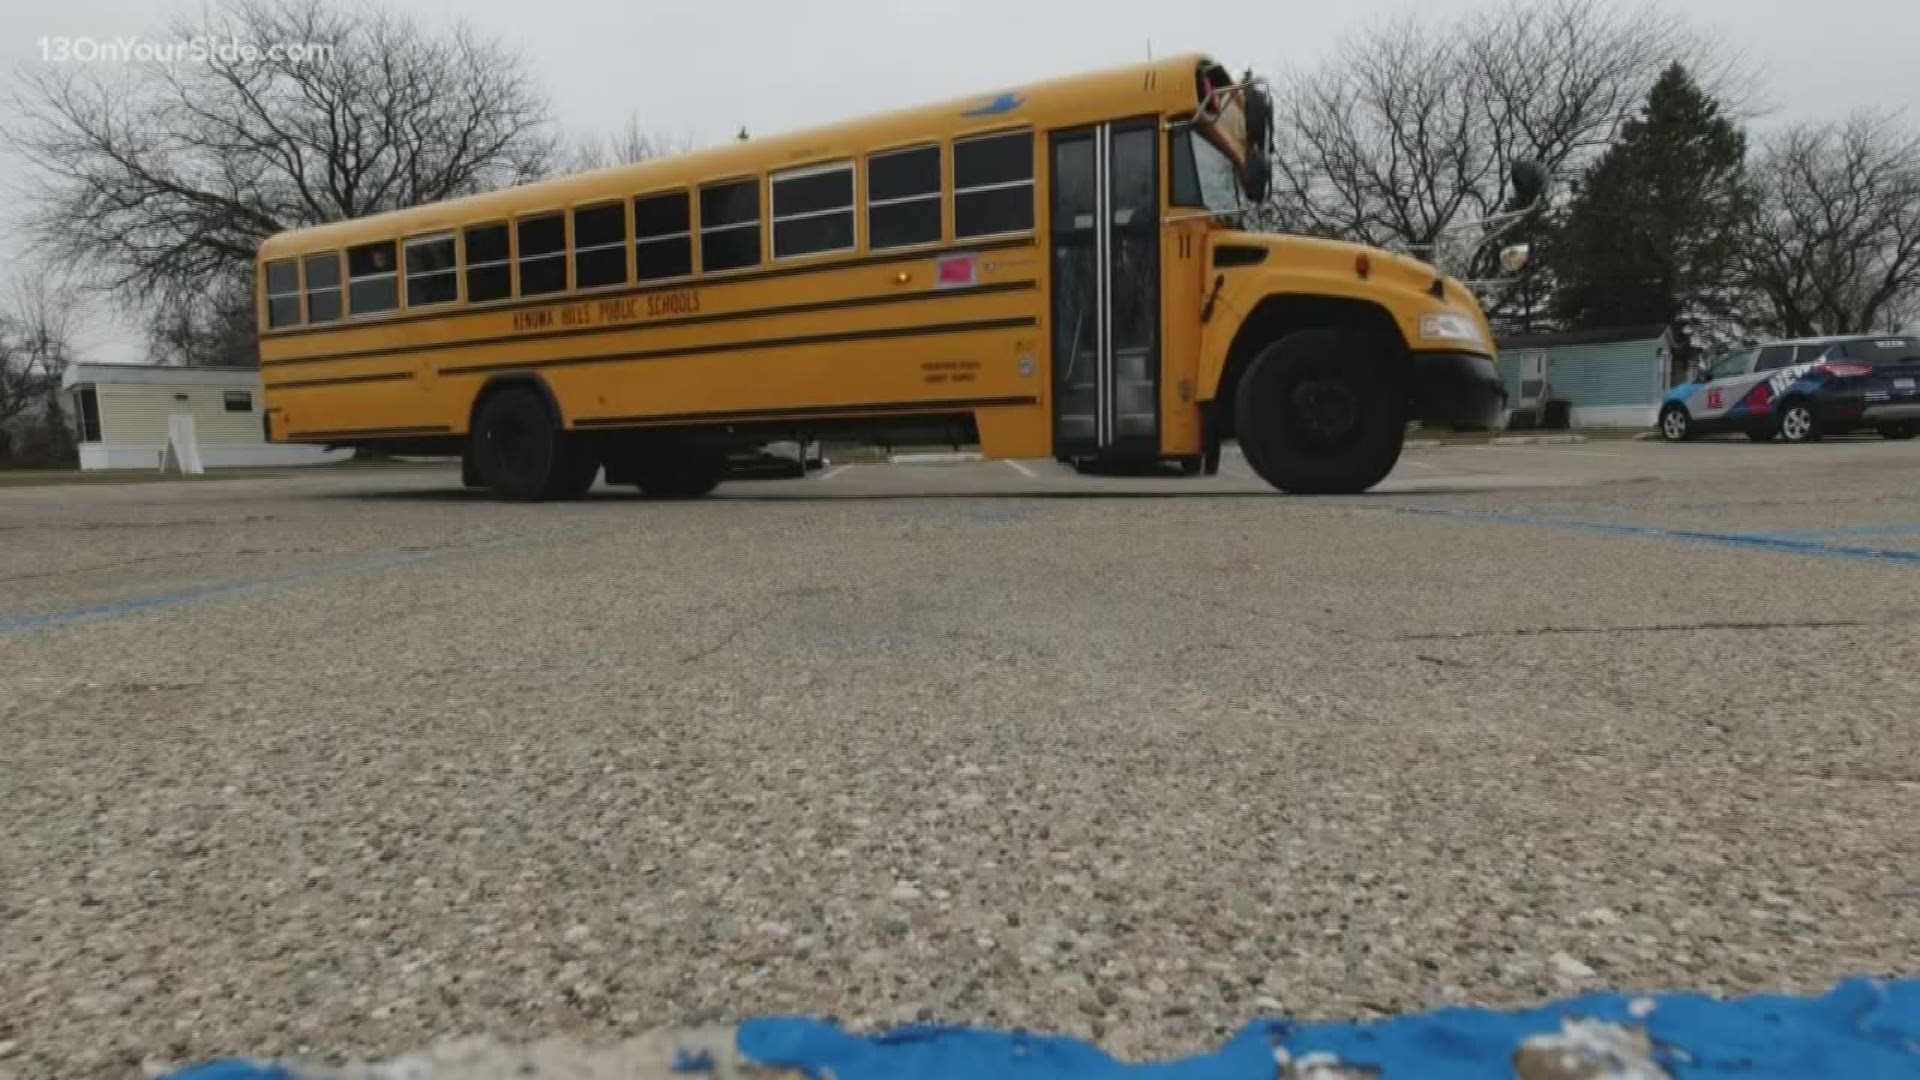 During the COVID-19 outbreak, school districts are offering food to families in need. One has chosen a unique way to reconnect with its community—by school bus.